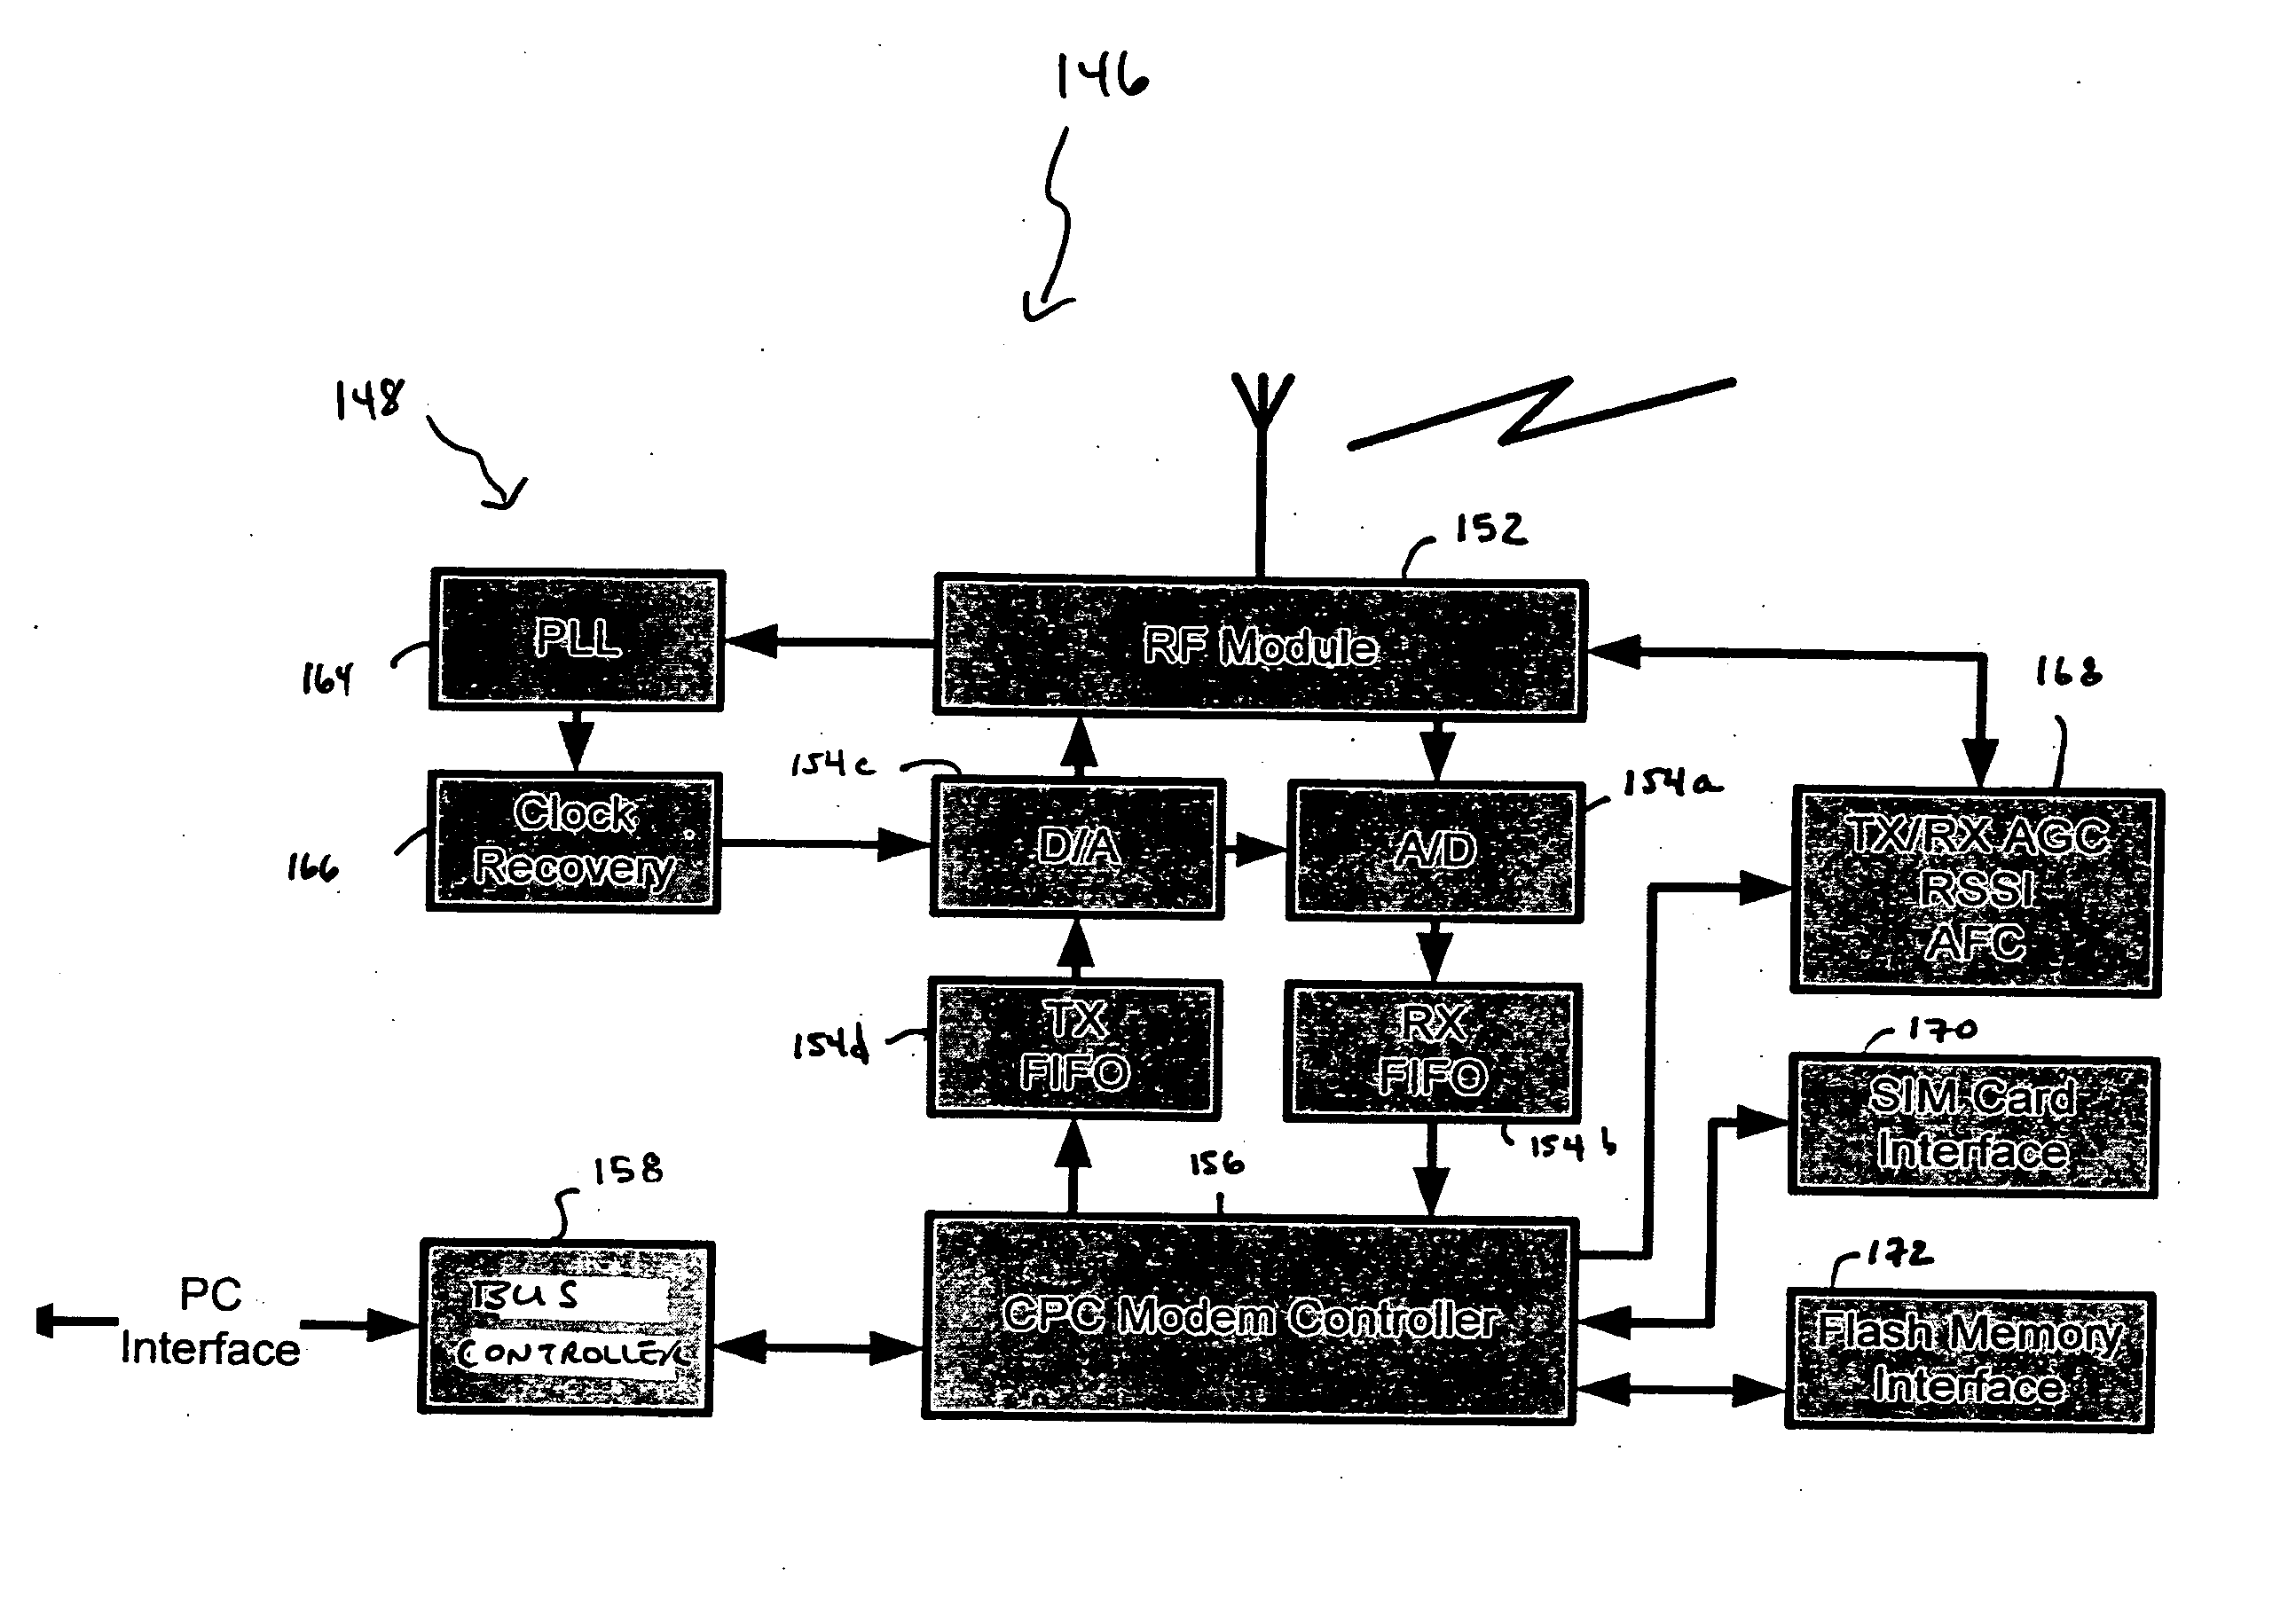 Cellular PC modem architecture and method of operation